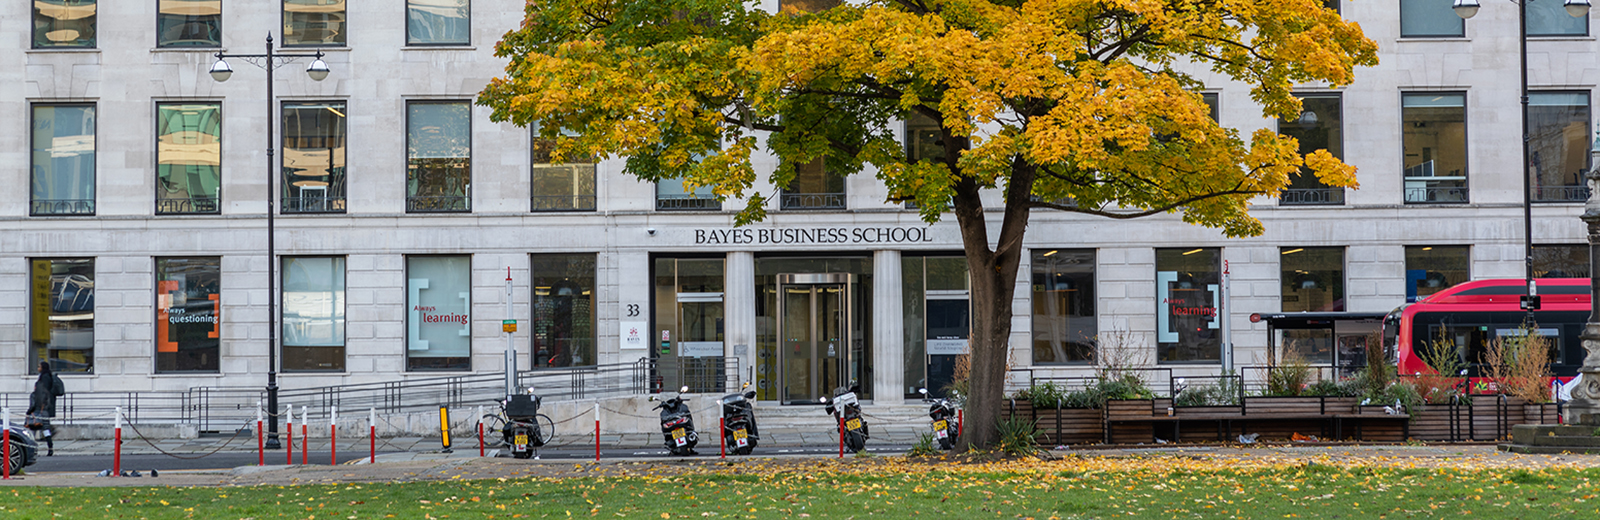 The front of Bayes Business School's Finsbury Square building